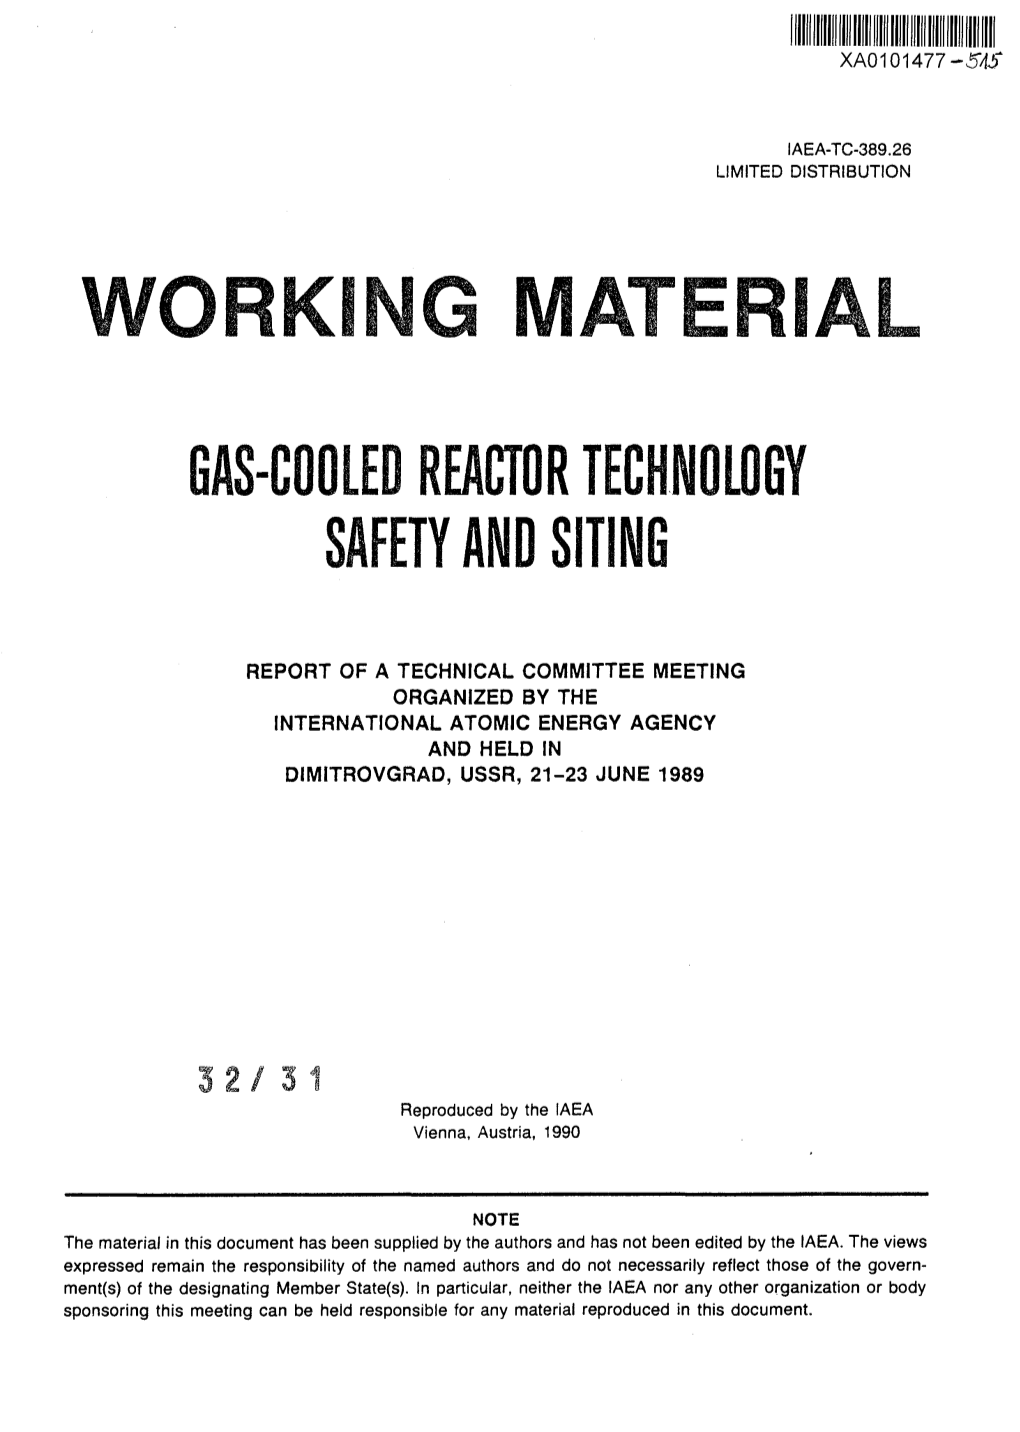 Reactor Technology Safety and Siting